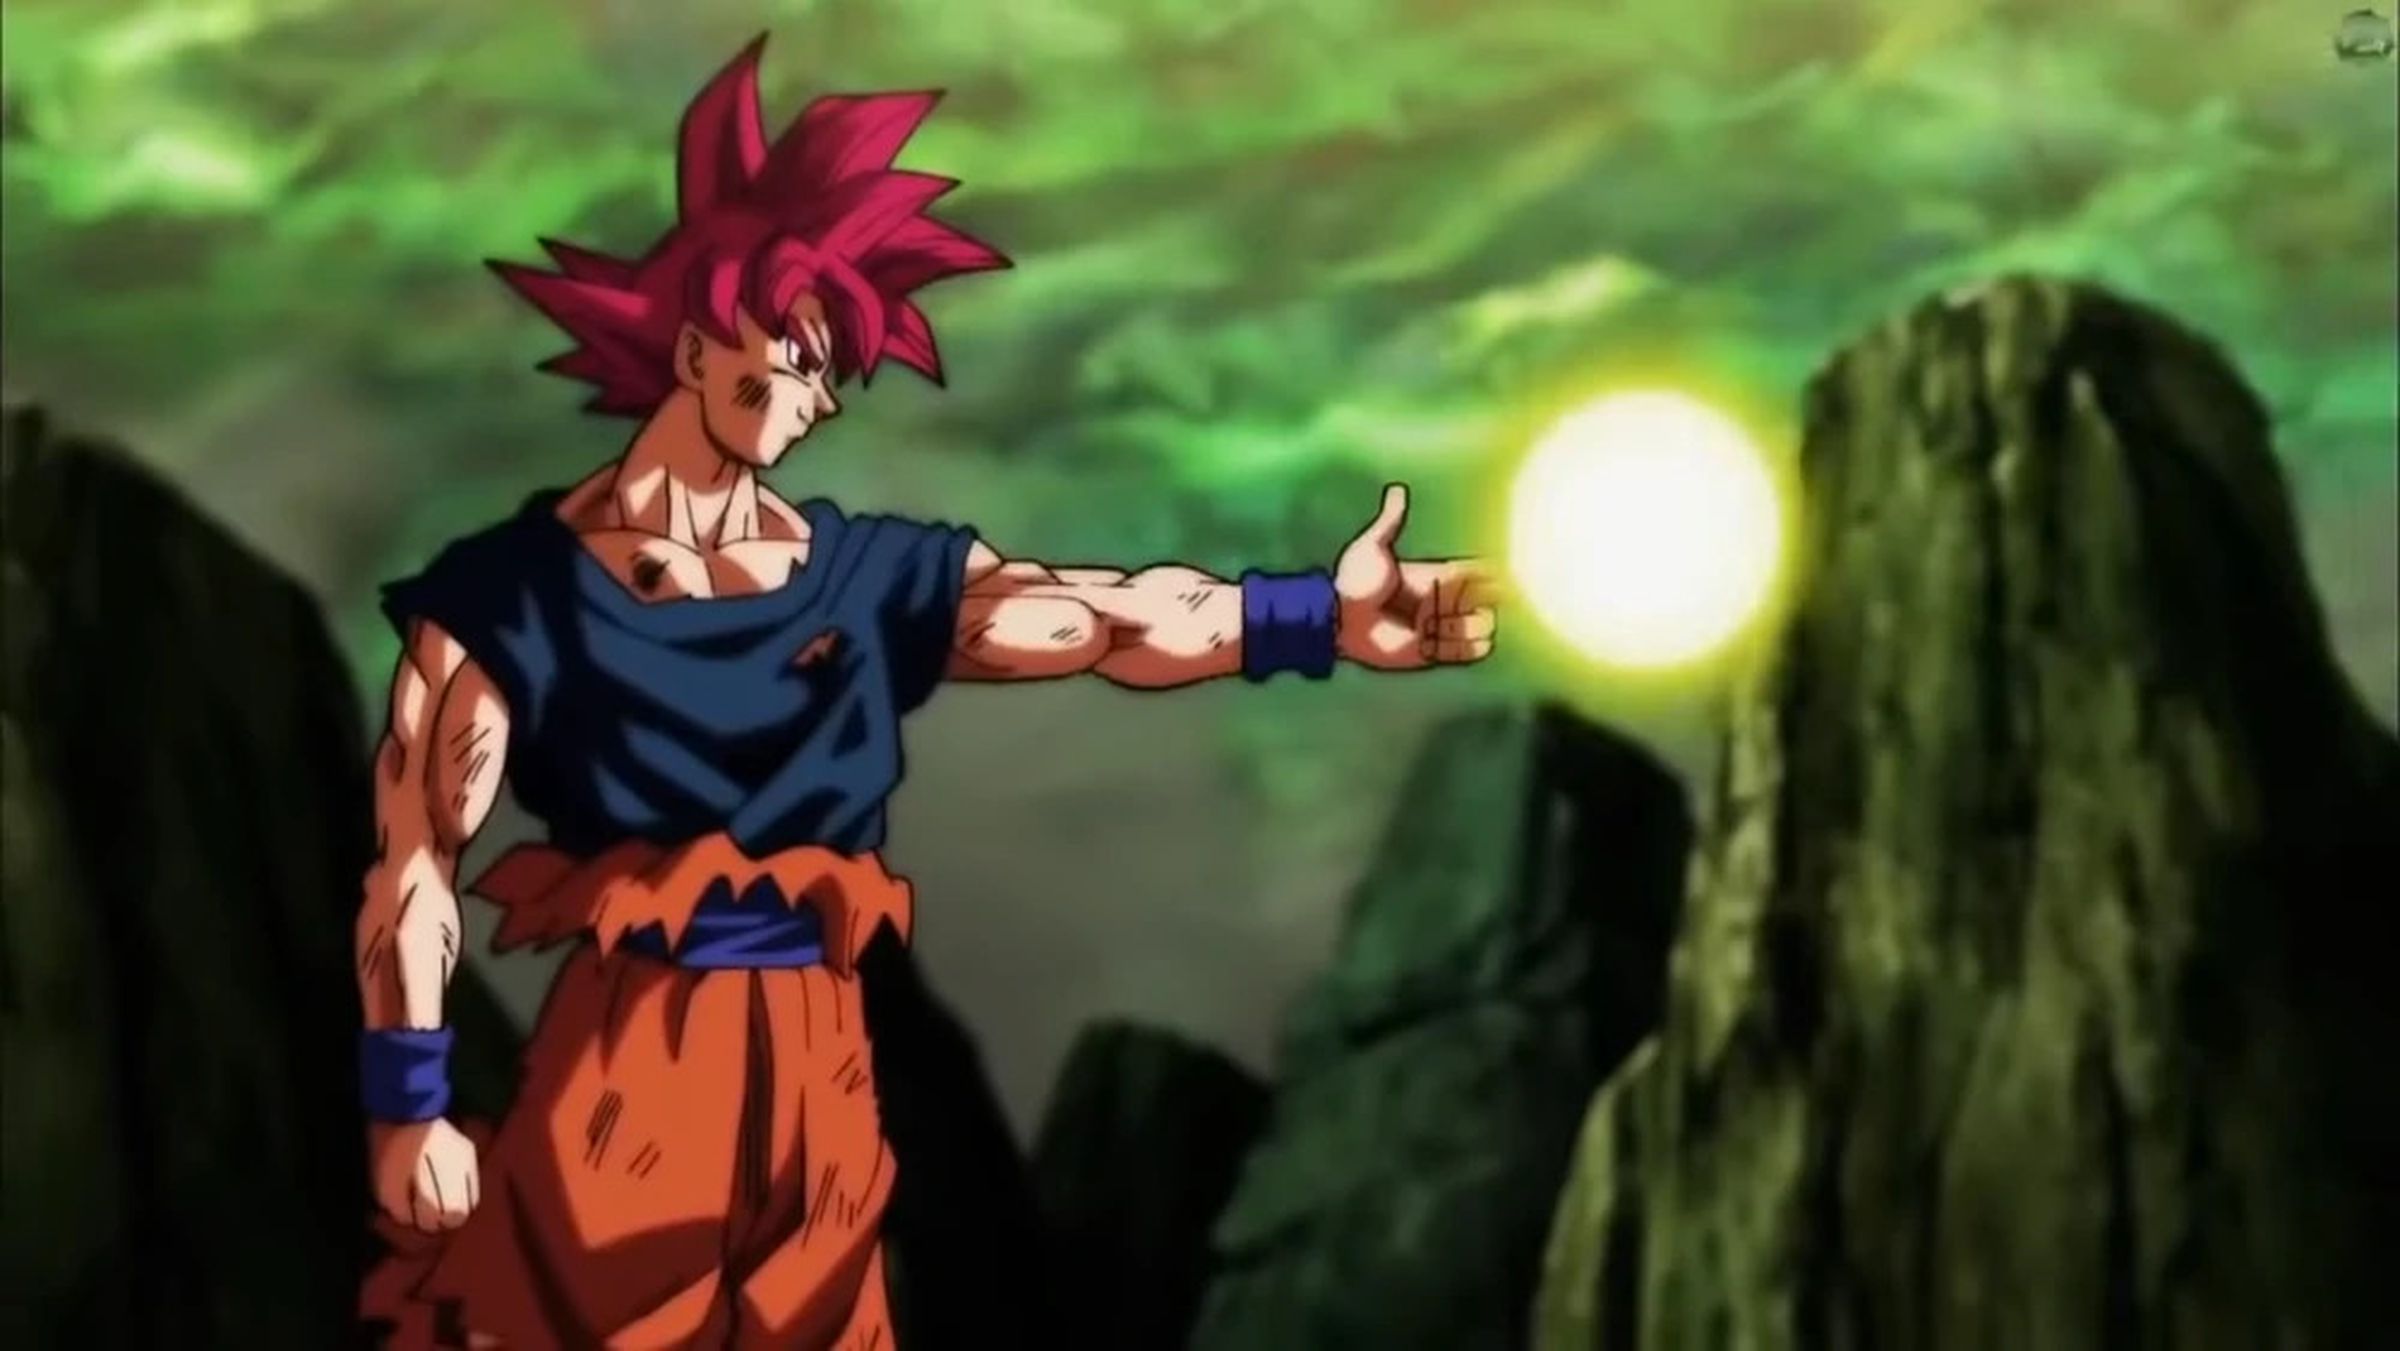 Screenshot from Dragon Ball Super featuring a magenta-haired Goku curling his hand into a gun shape and firing the God Shot energy move